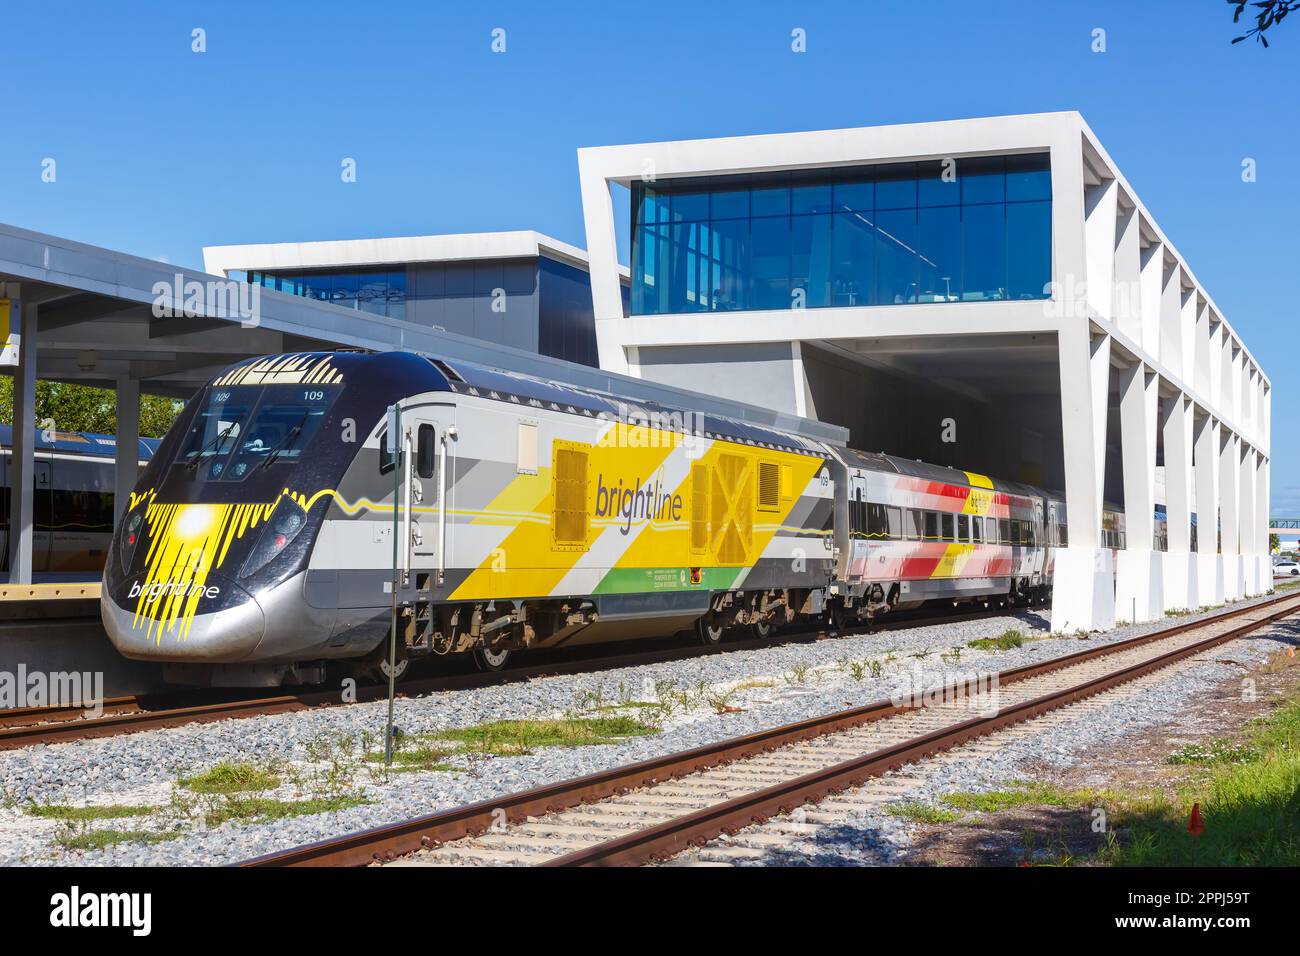 Brightline private inter-city rail train at West Palm Beach railway station in Florida, United States Stock Photo